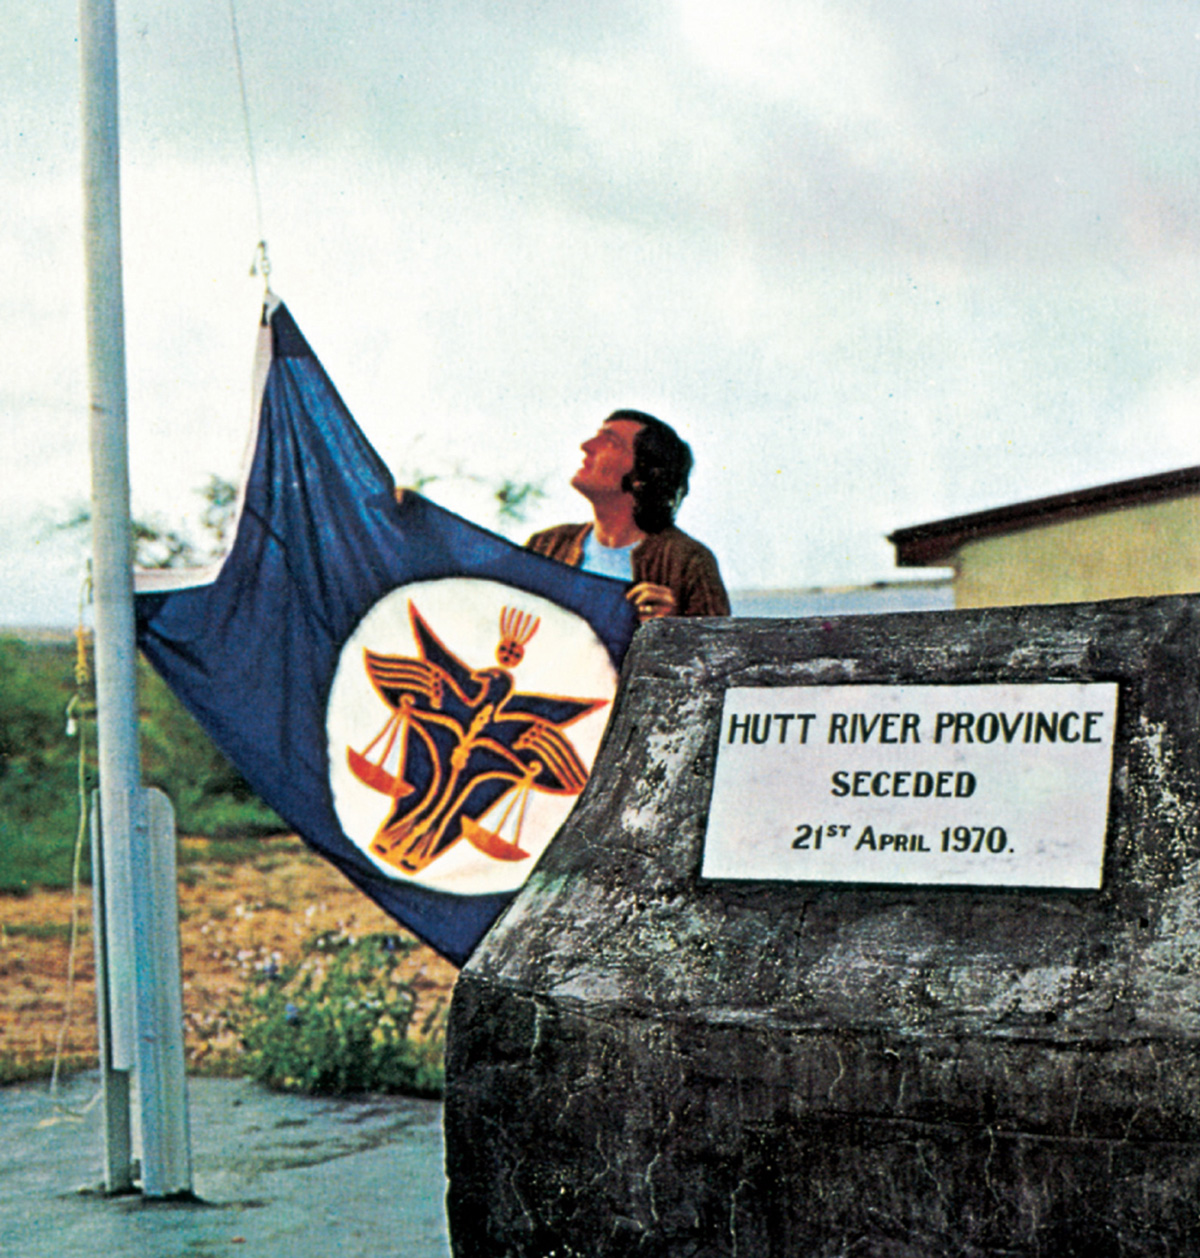 A photograph of a man raising the flag of the Hutt River Province Principality.